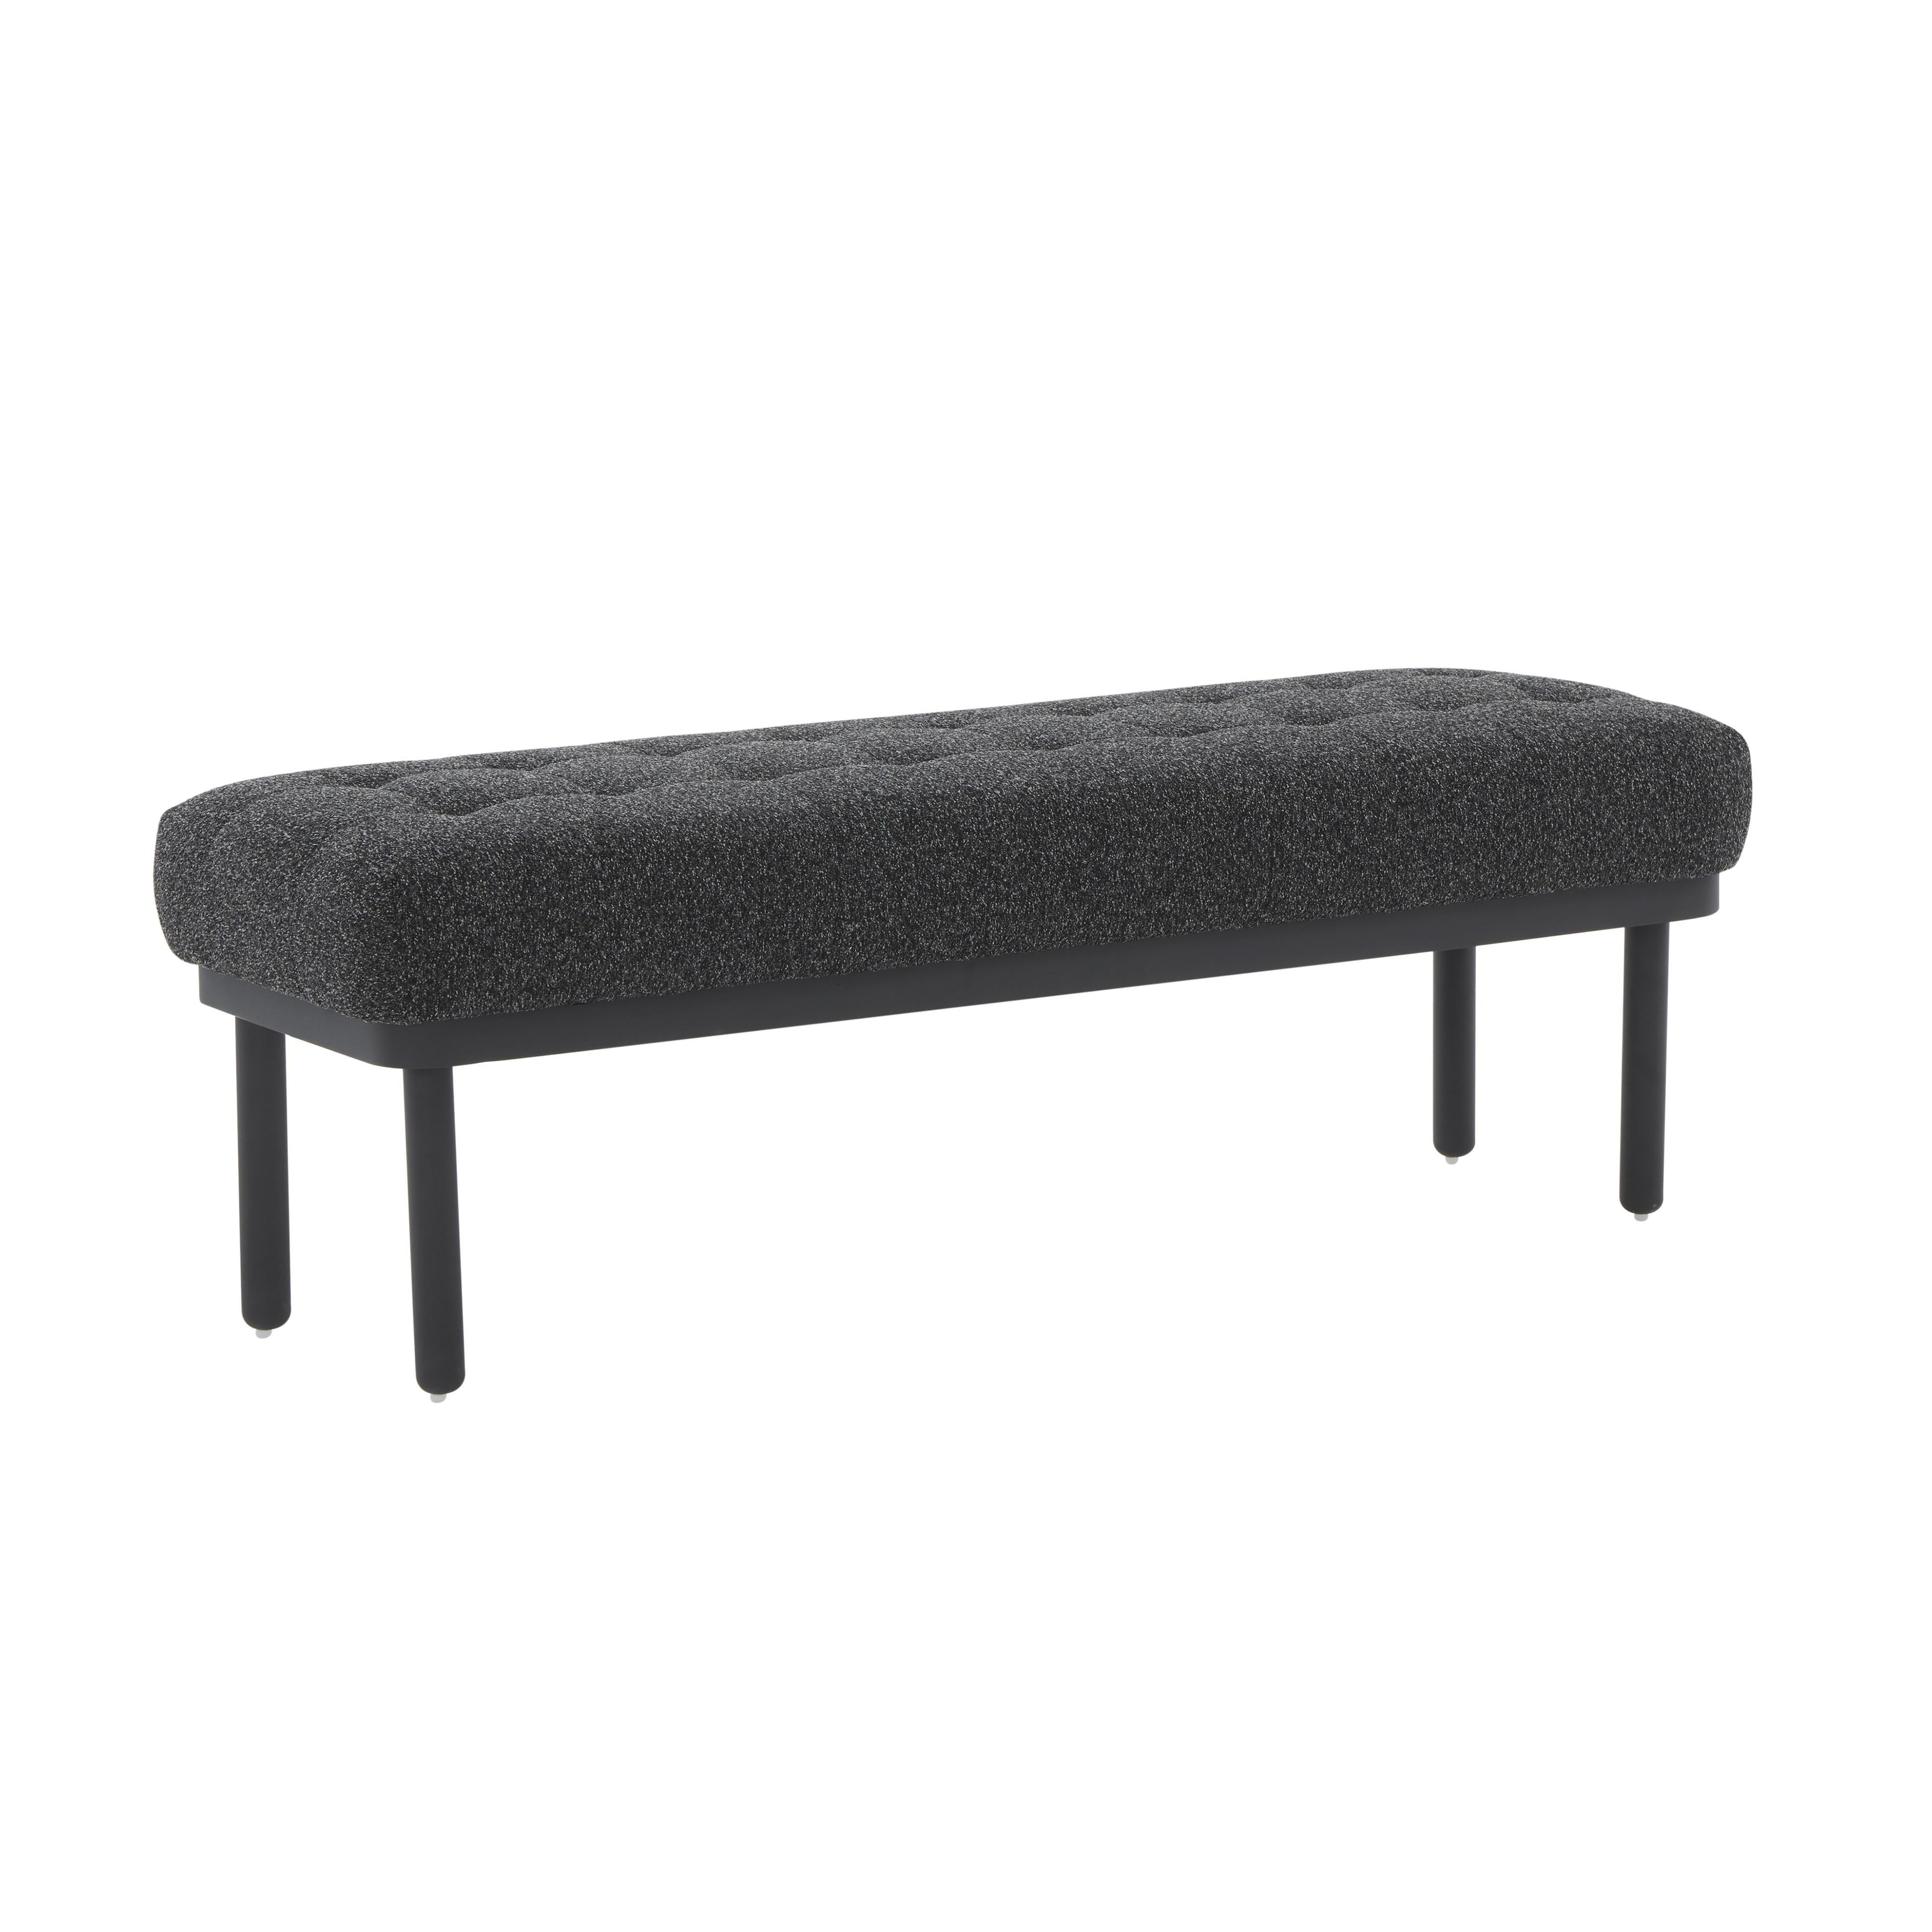 Tov Furniture Benches - Olivia Black Boucle Bench